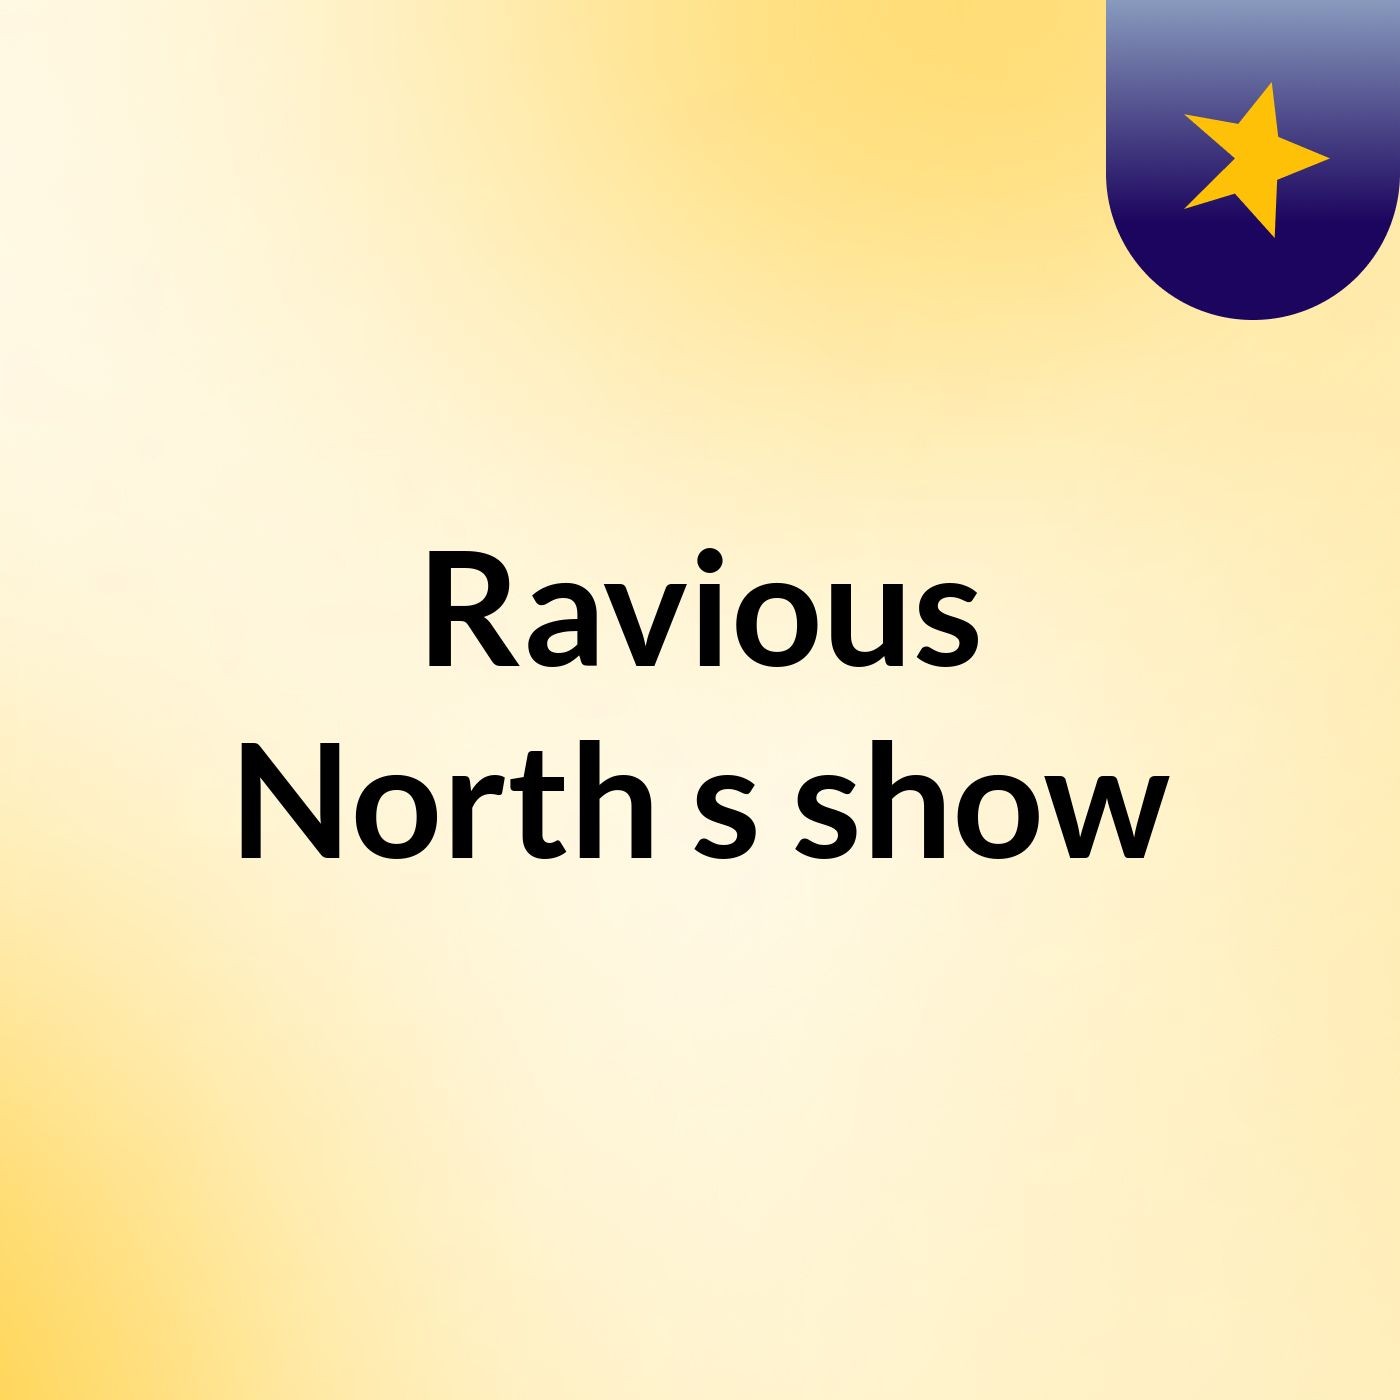 Episode 2 - Ravious North's show